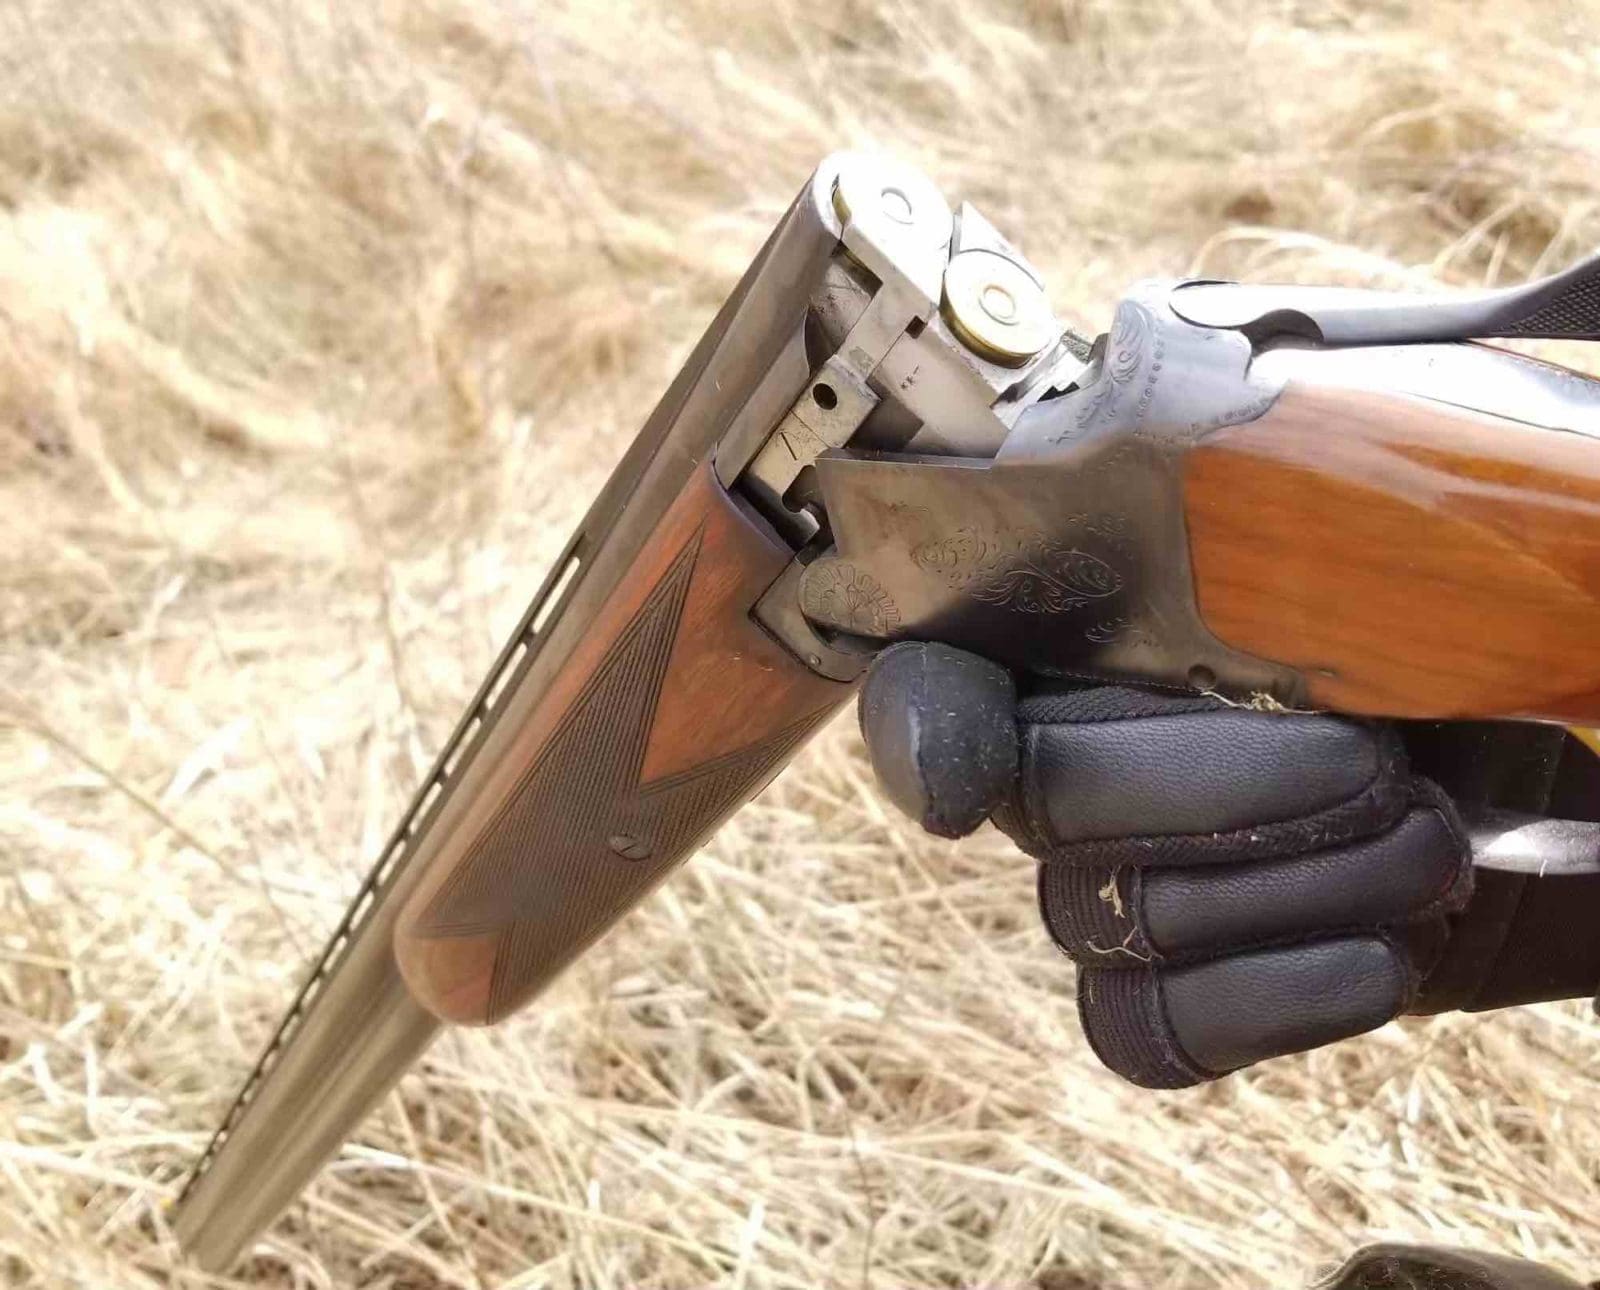 A Browning Superposed over and under shotgun with the action broken open